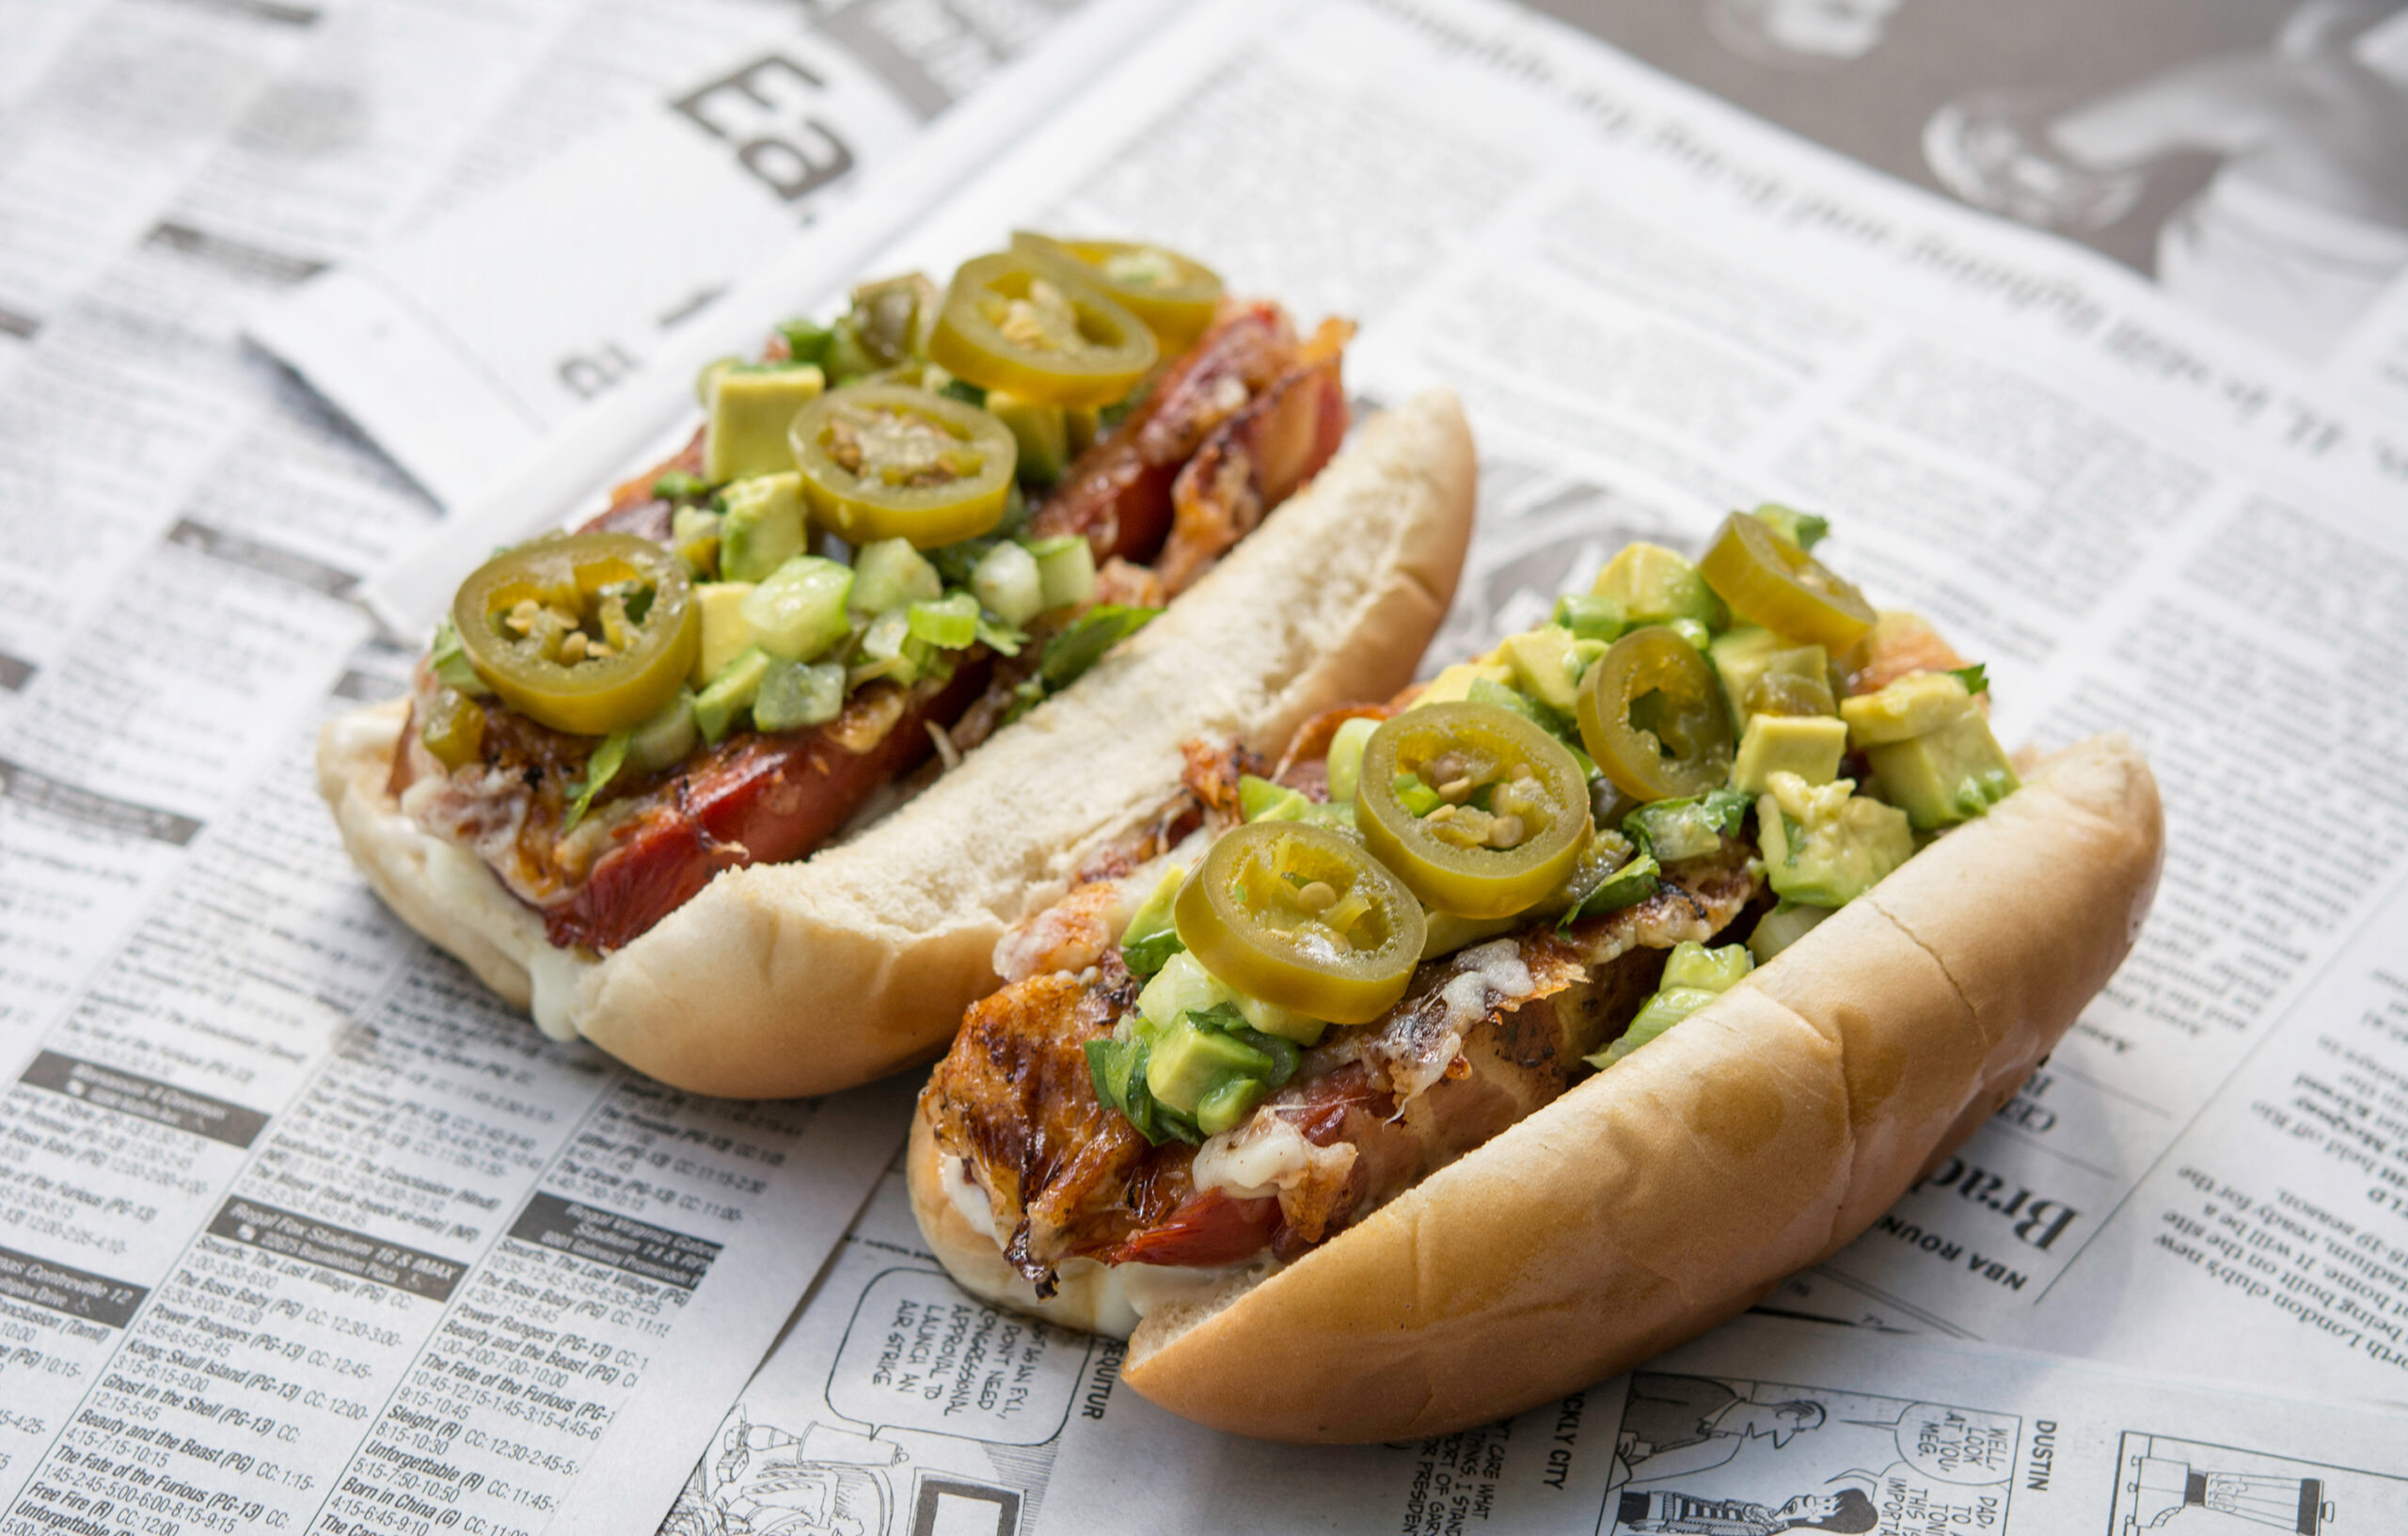 http://patijinich.com/wp-content/uploads/2017/05/bacon-cheese-dogs-with-avocado-relish-scaled.jpg